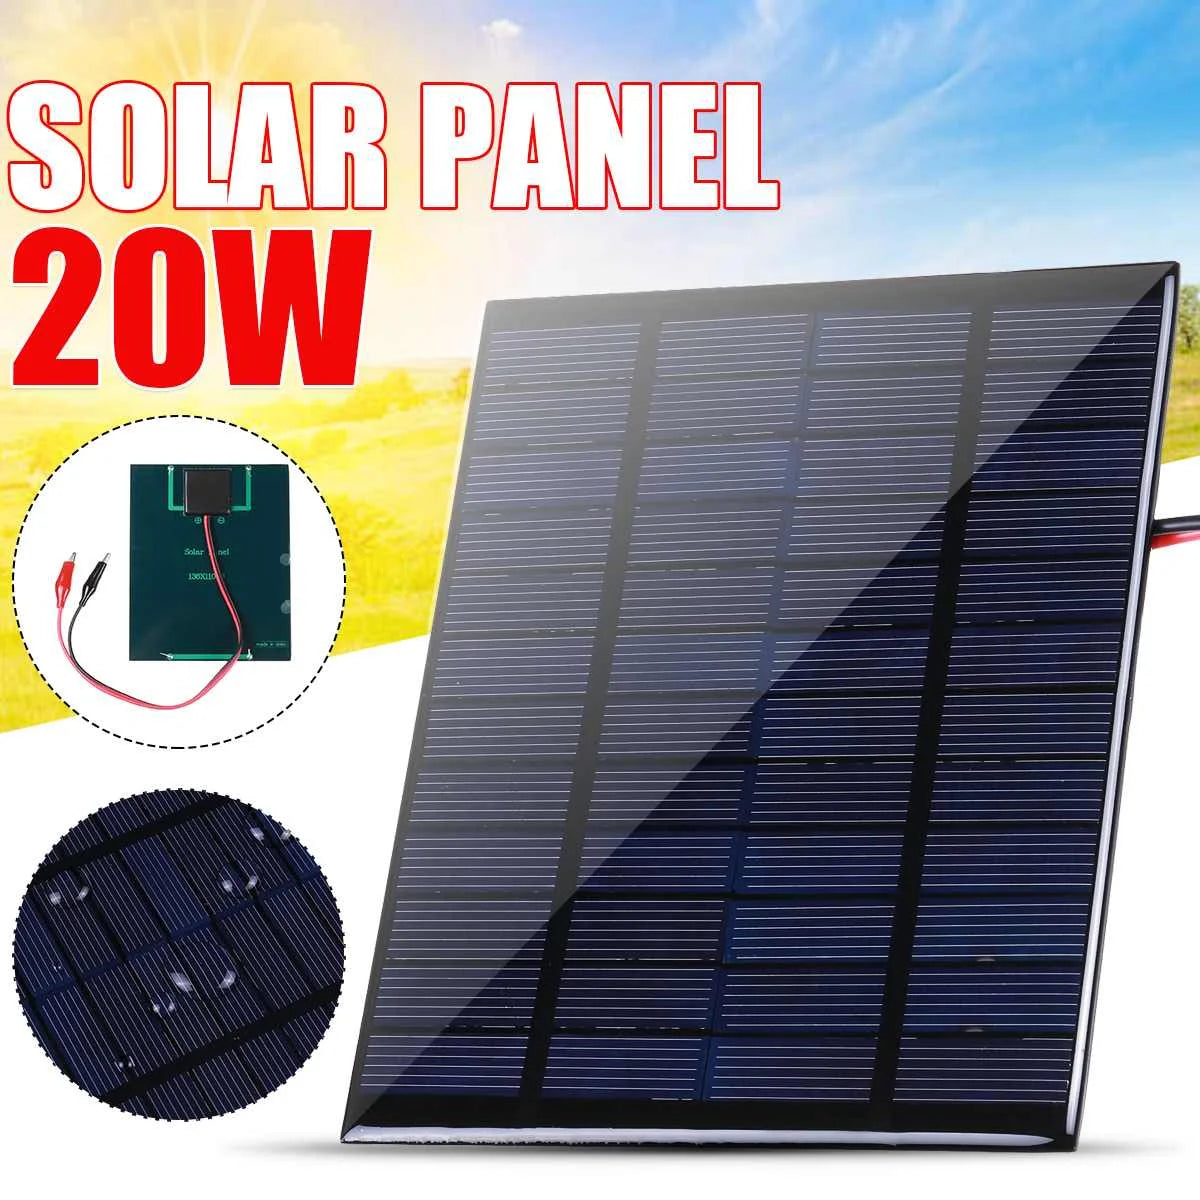 20W Solar Panel, Outdoor application suitable for rural, residential, industrial, park, garden, street, and public square use.